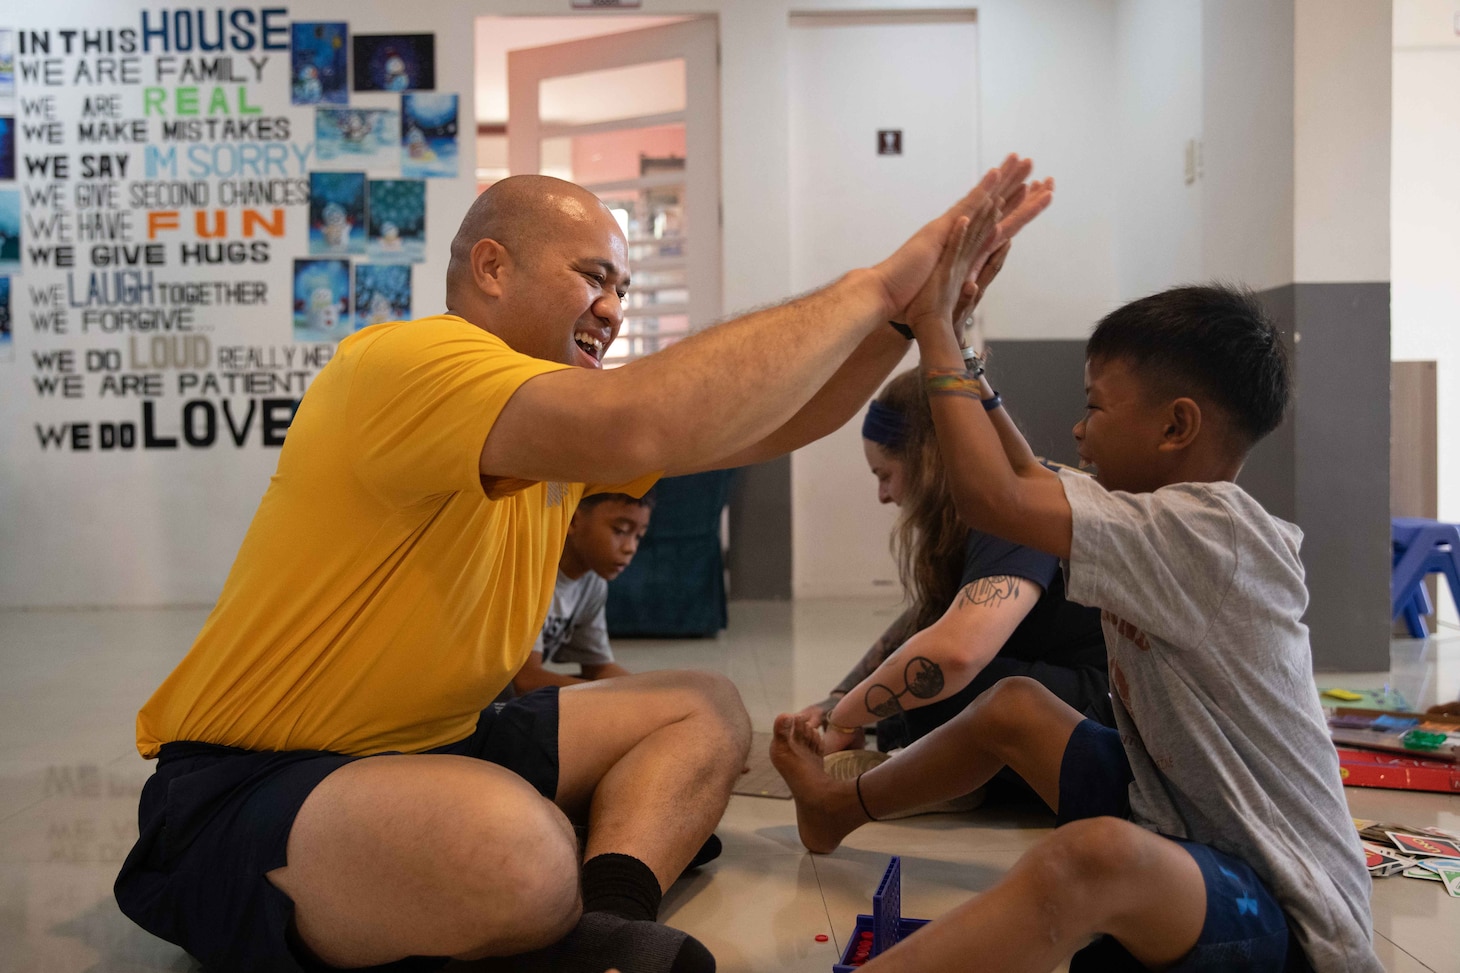 Lt. j.g. Nafetalai Teaupa, from Kailua Kona, Hawaii, assigned to the Arleigh Burke-class guided-missile destroyer USS William P. Lawrence (DDG 110), celebrates winning a board game with a child from Gentle Hands Orphanage during a community relations event in Manila, Philippines.